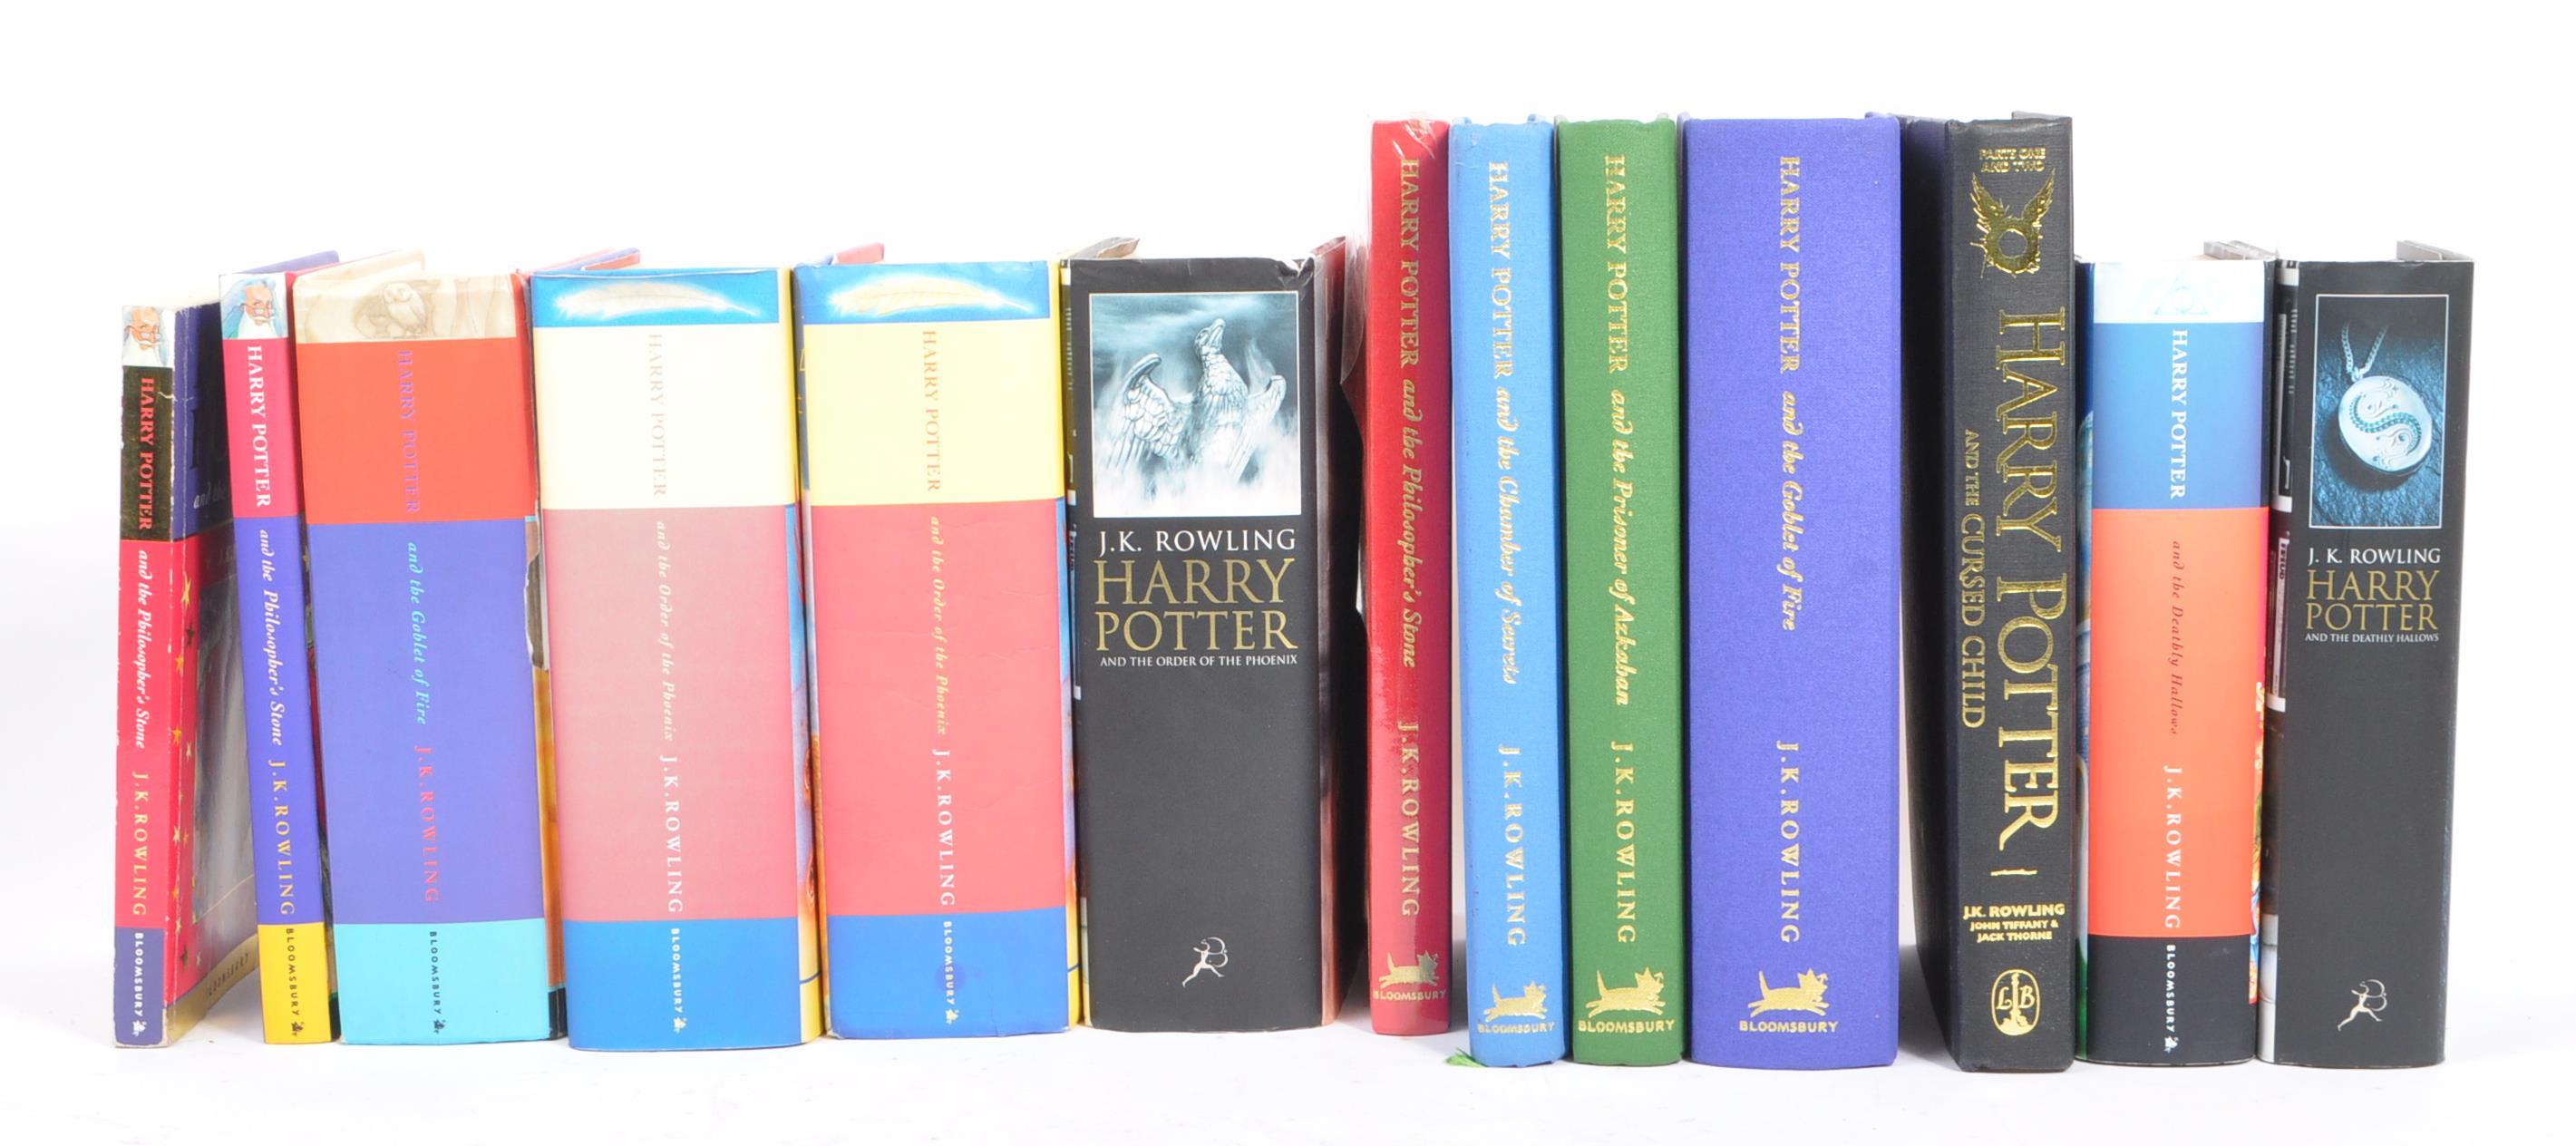 J. K. ROWLING - COLLECTION OF HARRY POTTER BOOKS